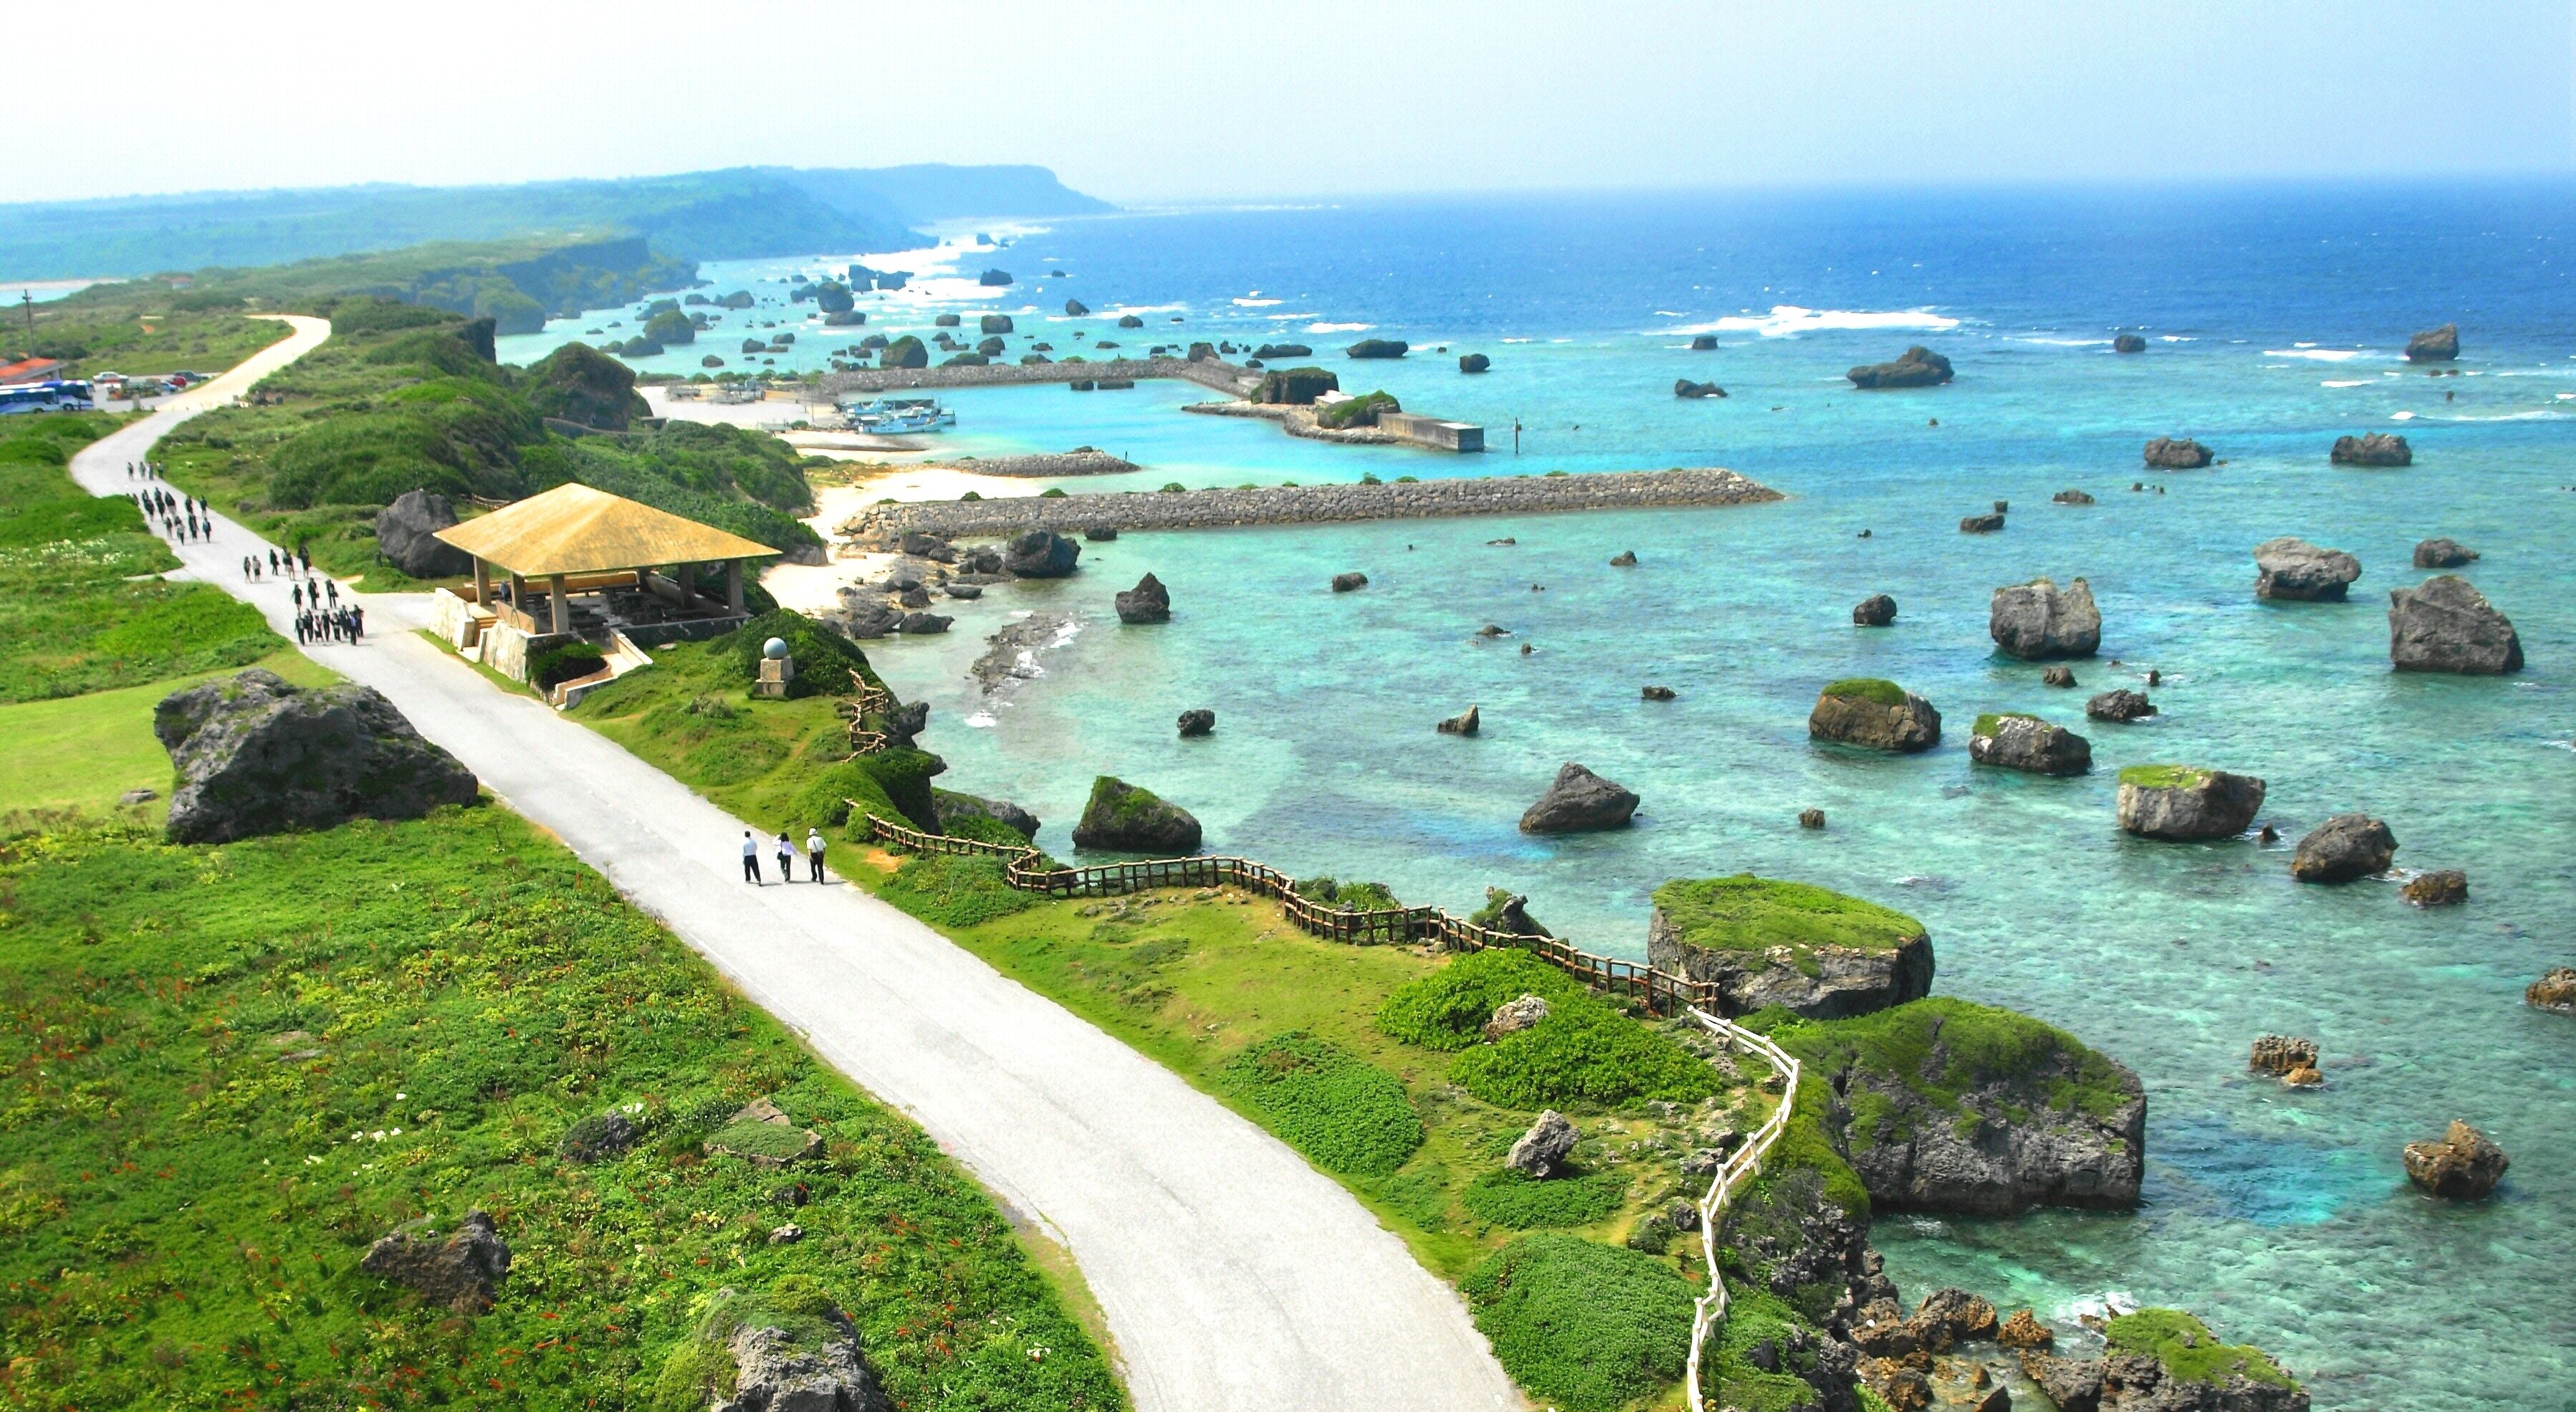 Among all the beaches in Okinawa, the ones on Miyako-jima Island are considered the best.